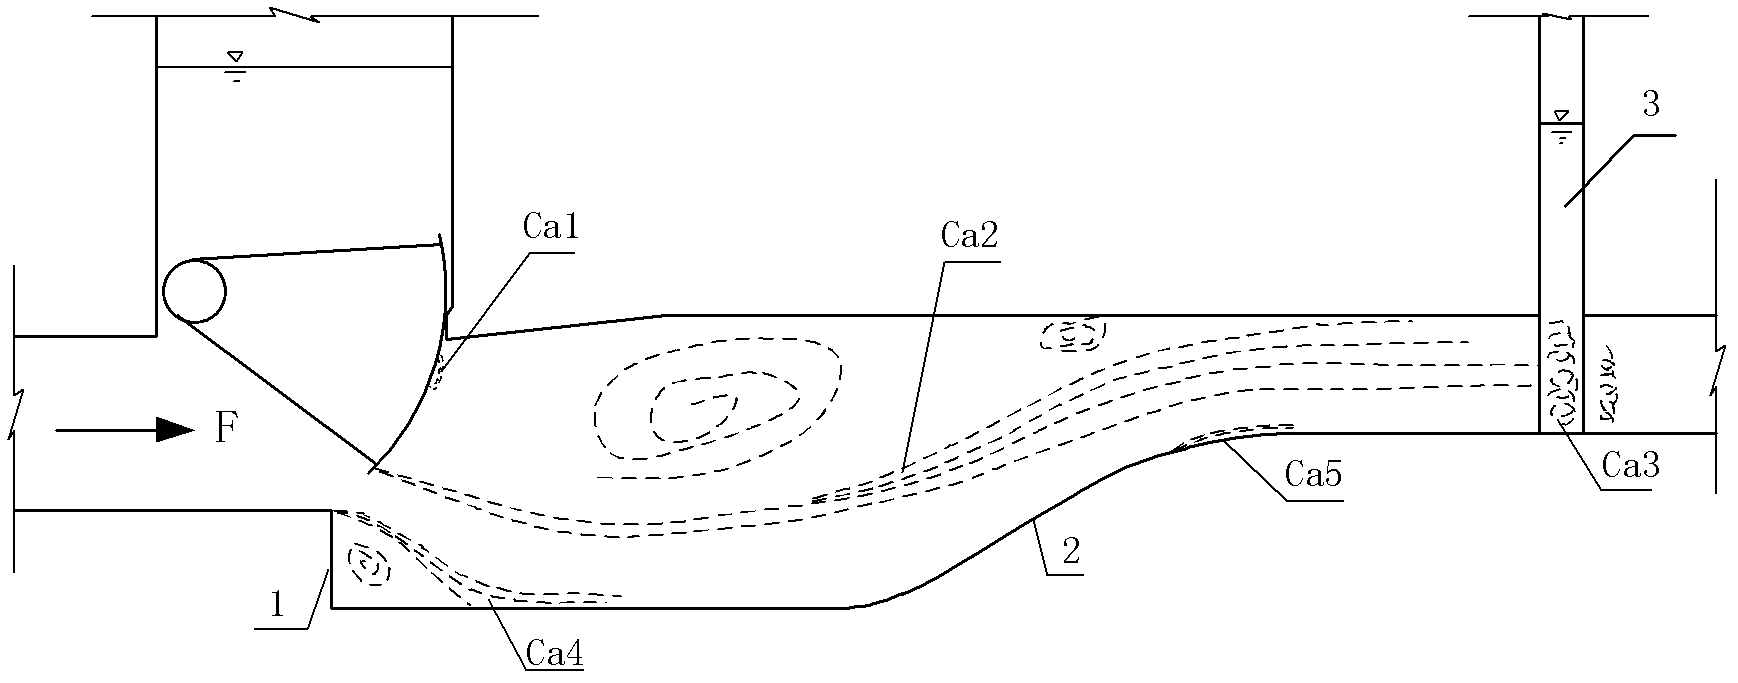 Method for relieving sill-lifting cavitation of suddenly-enlarged gallery for high-lift ship locks